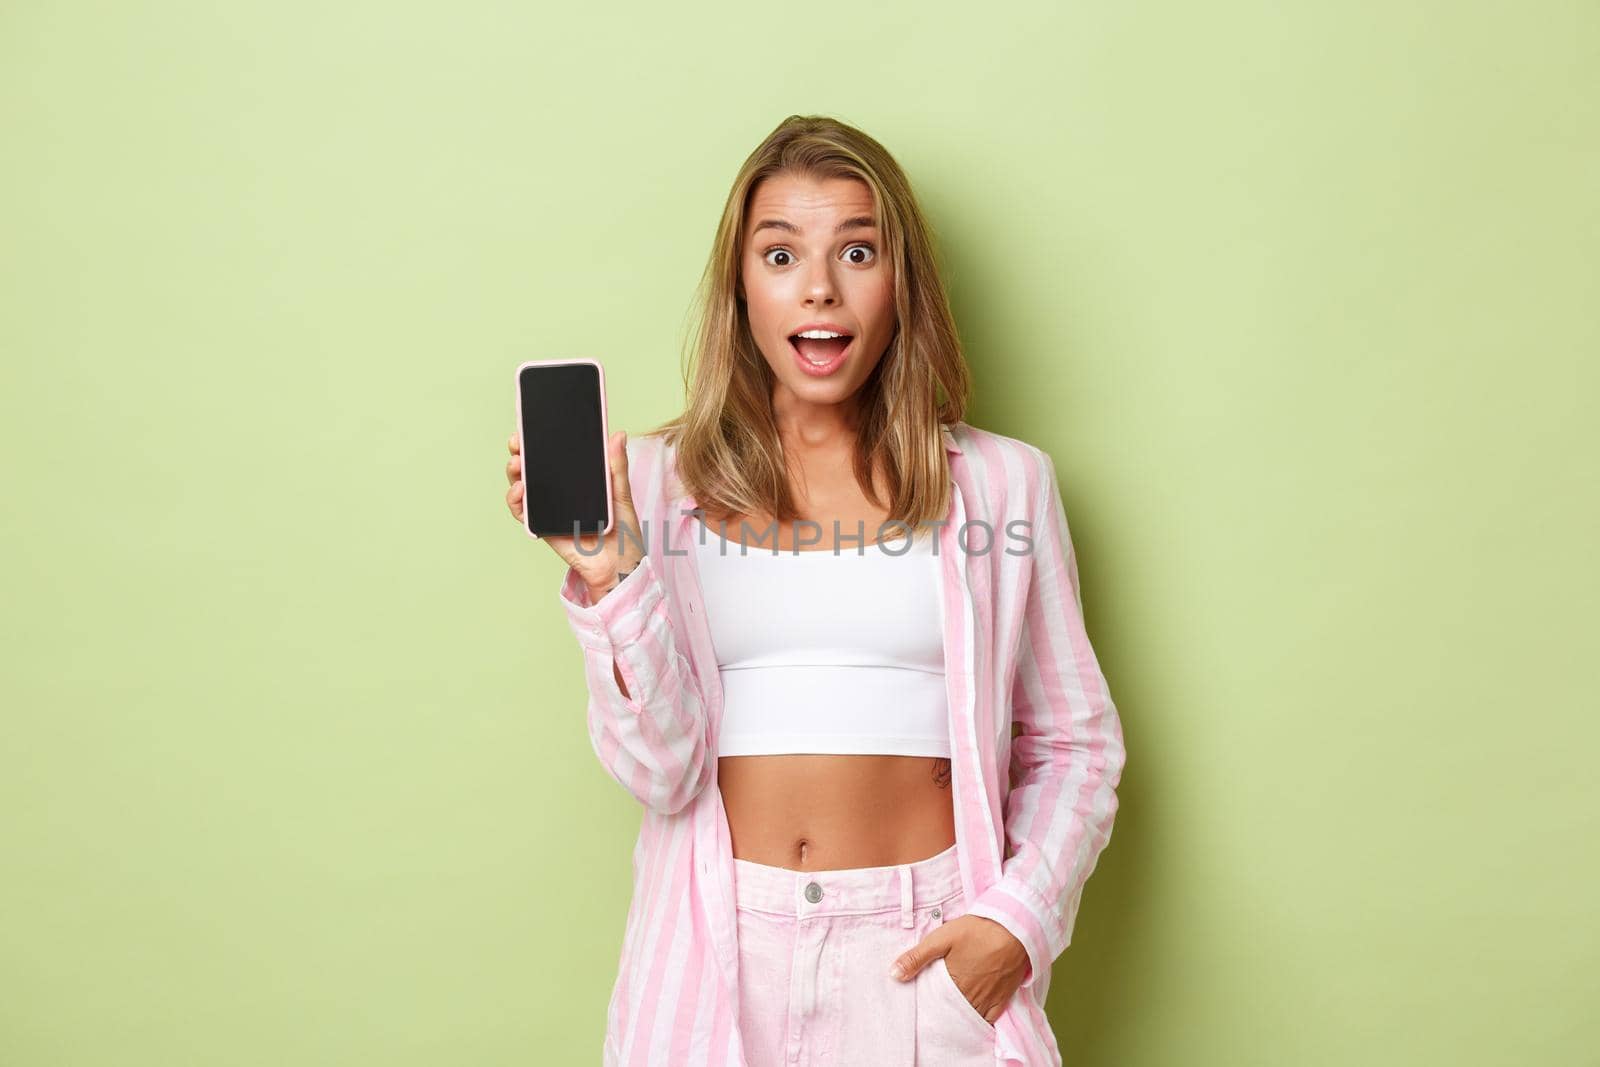 Image of blond attractive female model in pink shirt, showing smartphone screen and looking excited, standing over green background.